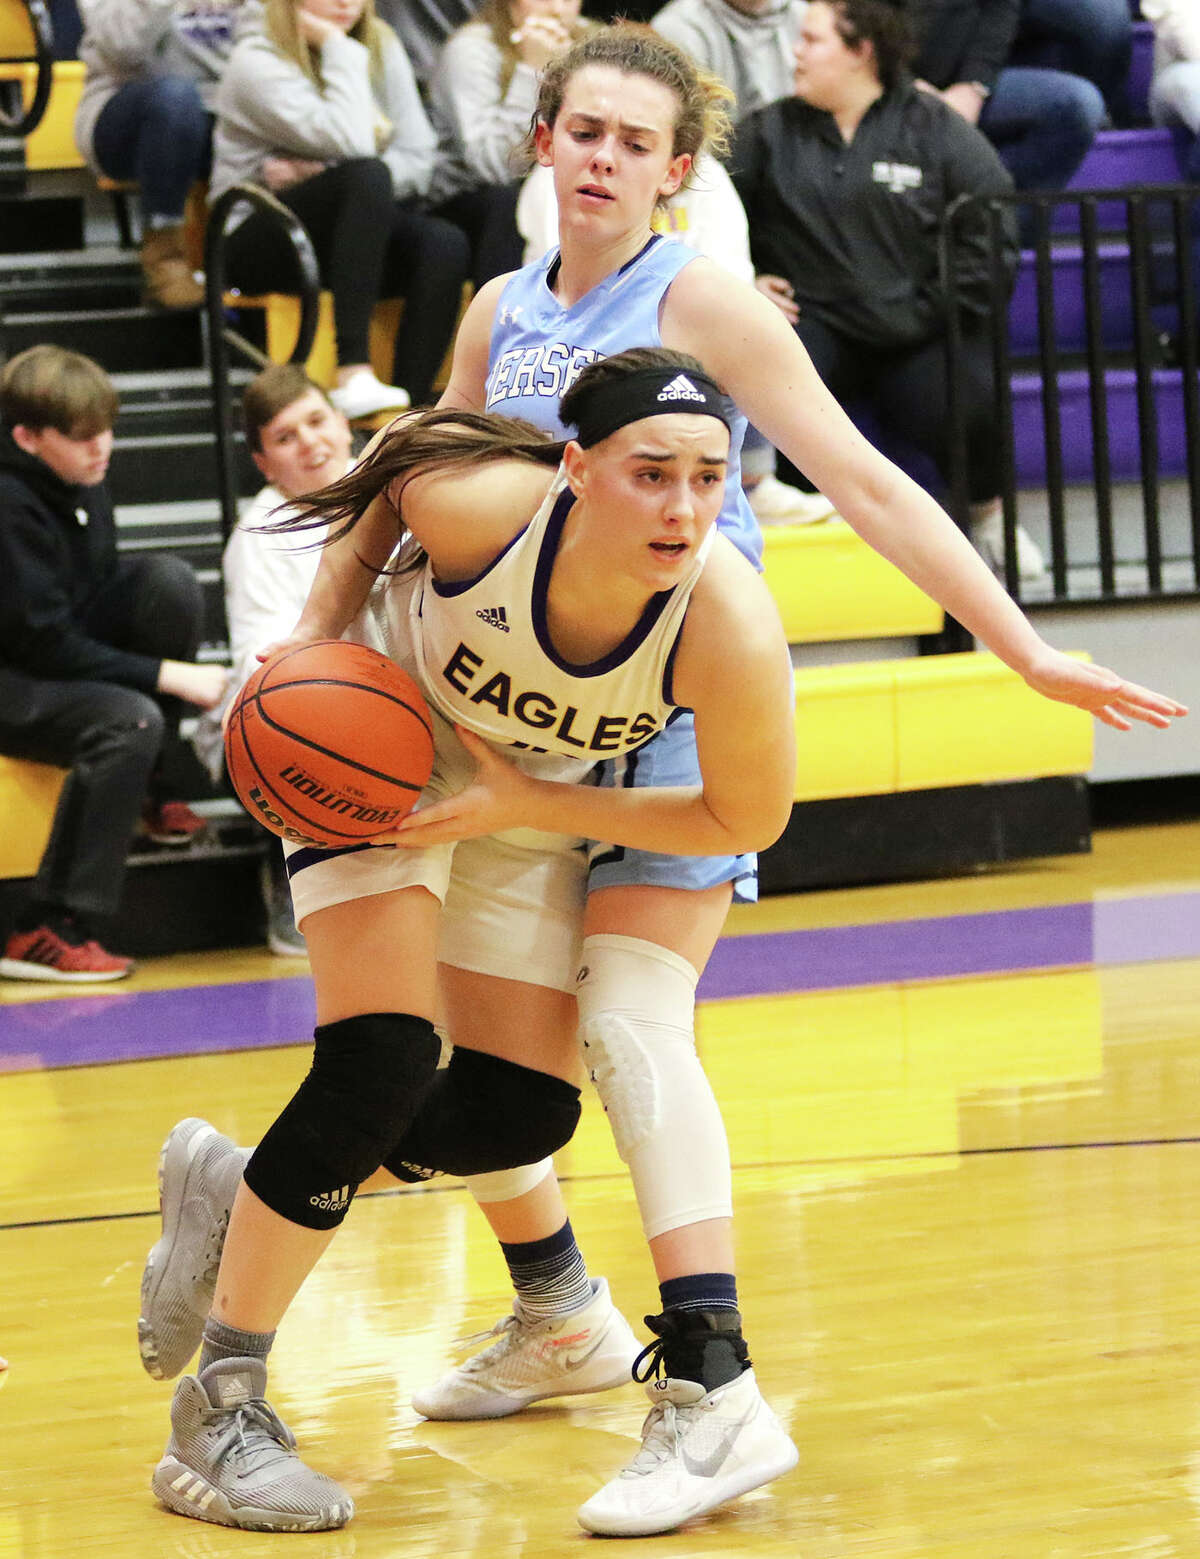 CM's Anna Hall (left) drives past Jersey's Chloe White in a game at Bethalto.